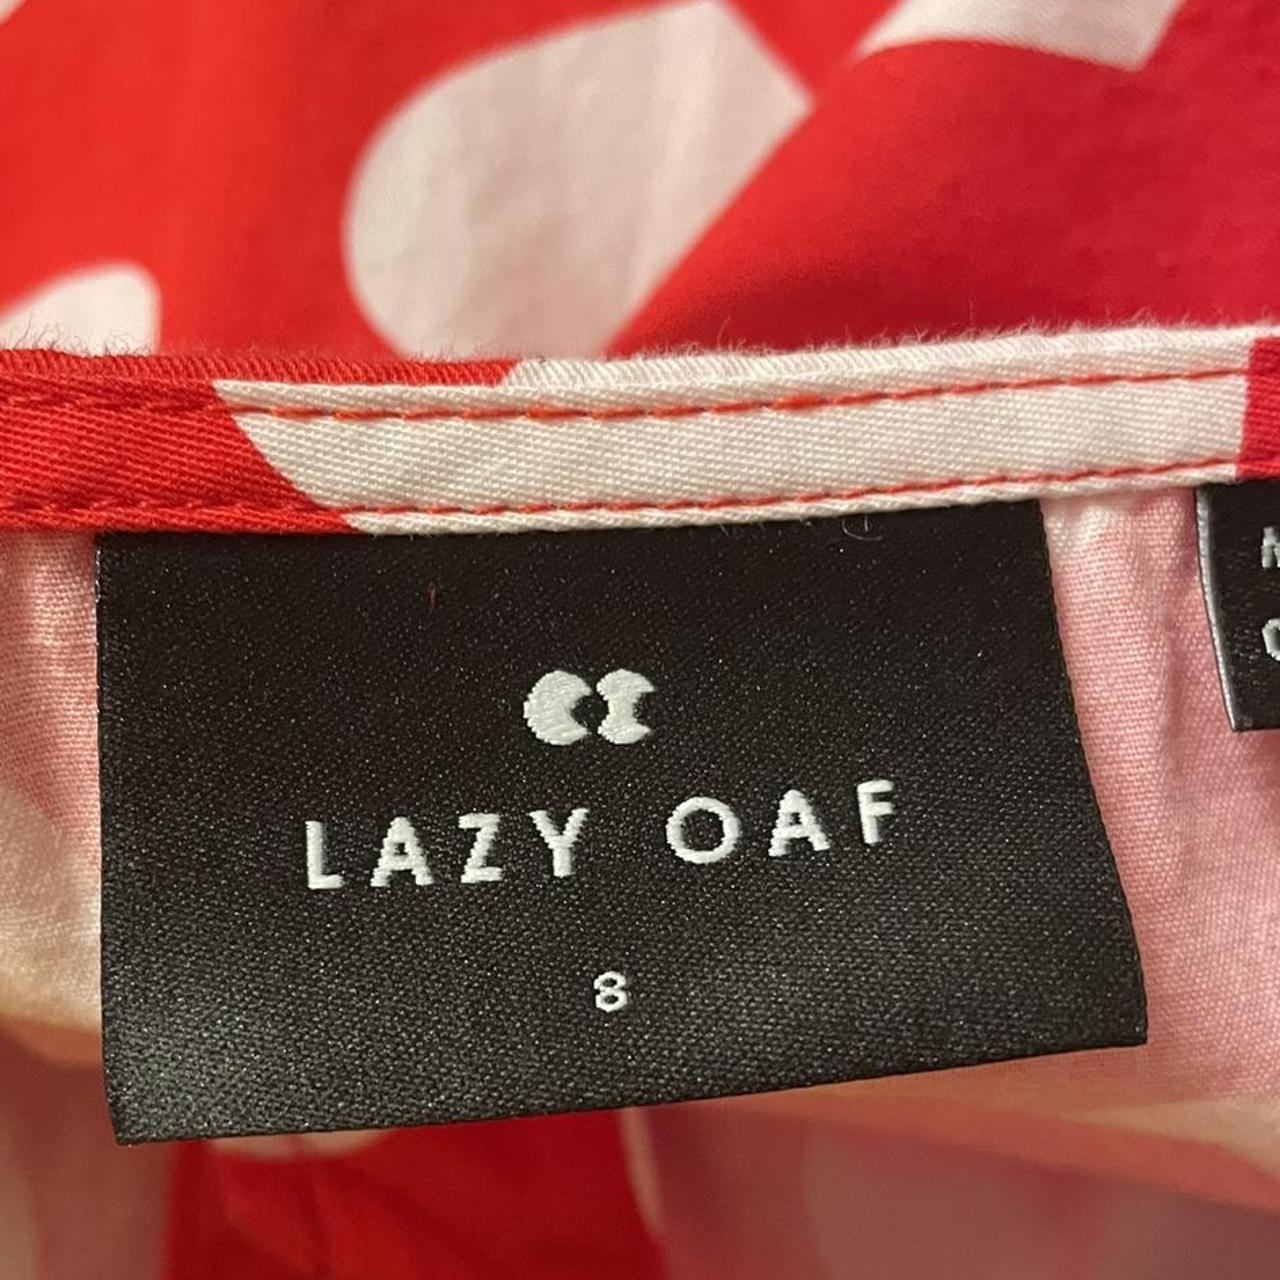 Product Image 4 - Lazy oaf red baby doll